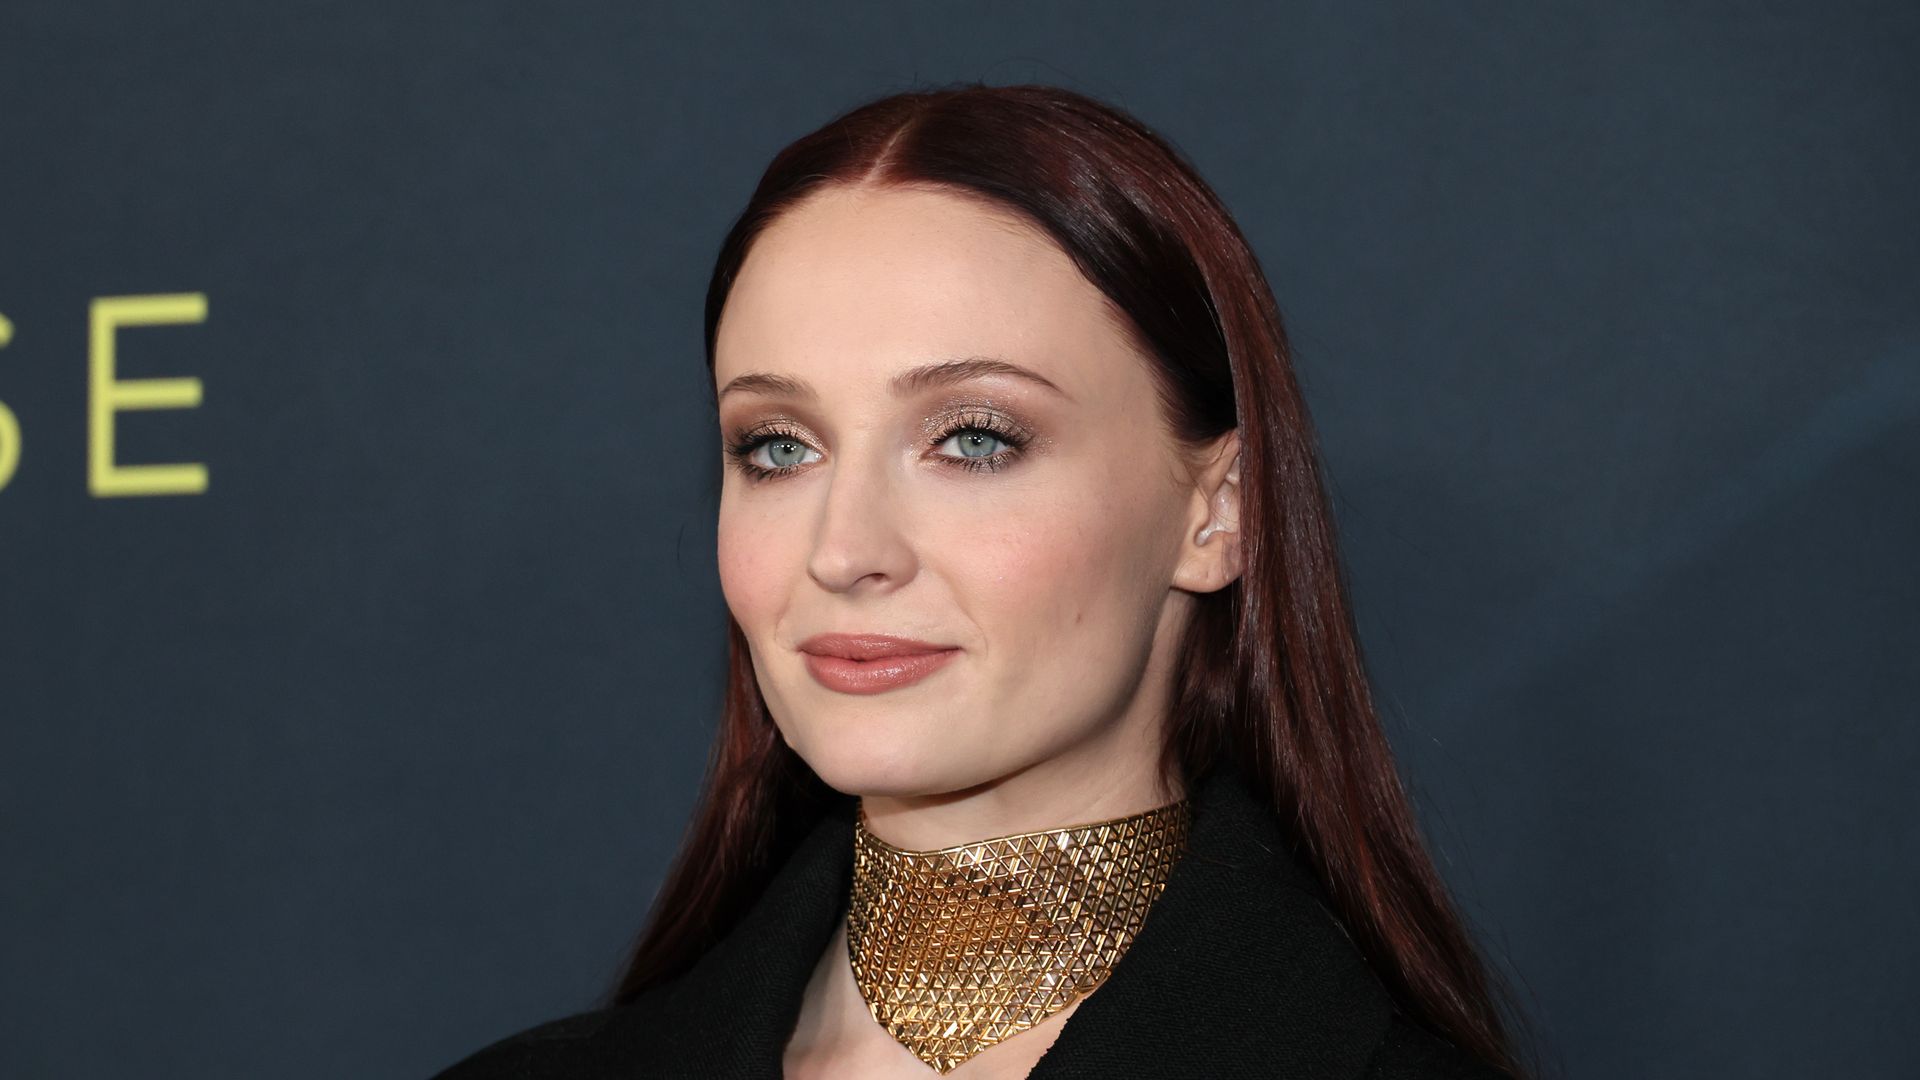 Sophie Turner attends HBO Max's "The Staircase" New York Premiere at Museum of Modern Art on May 03, 2022 in New York City.